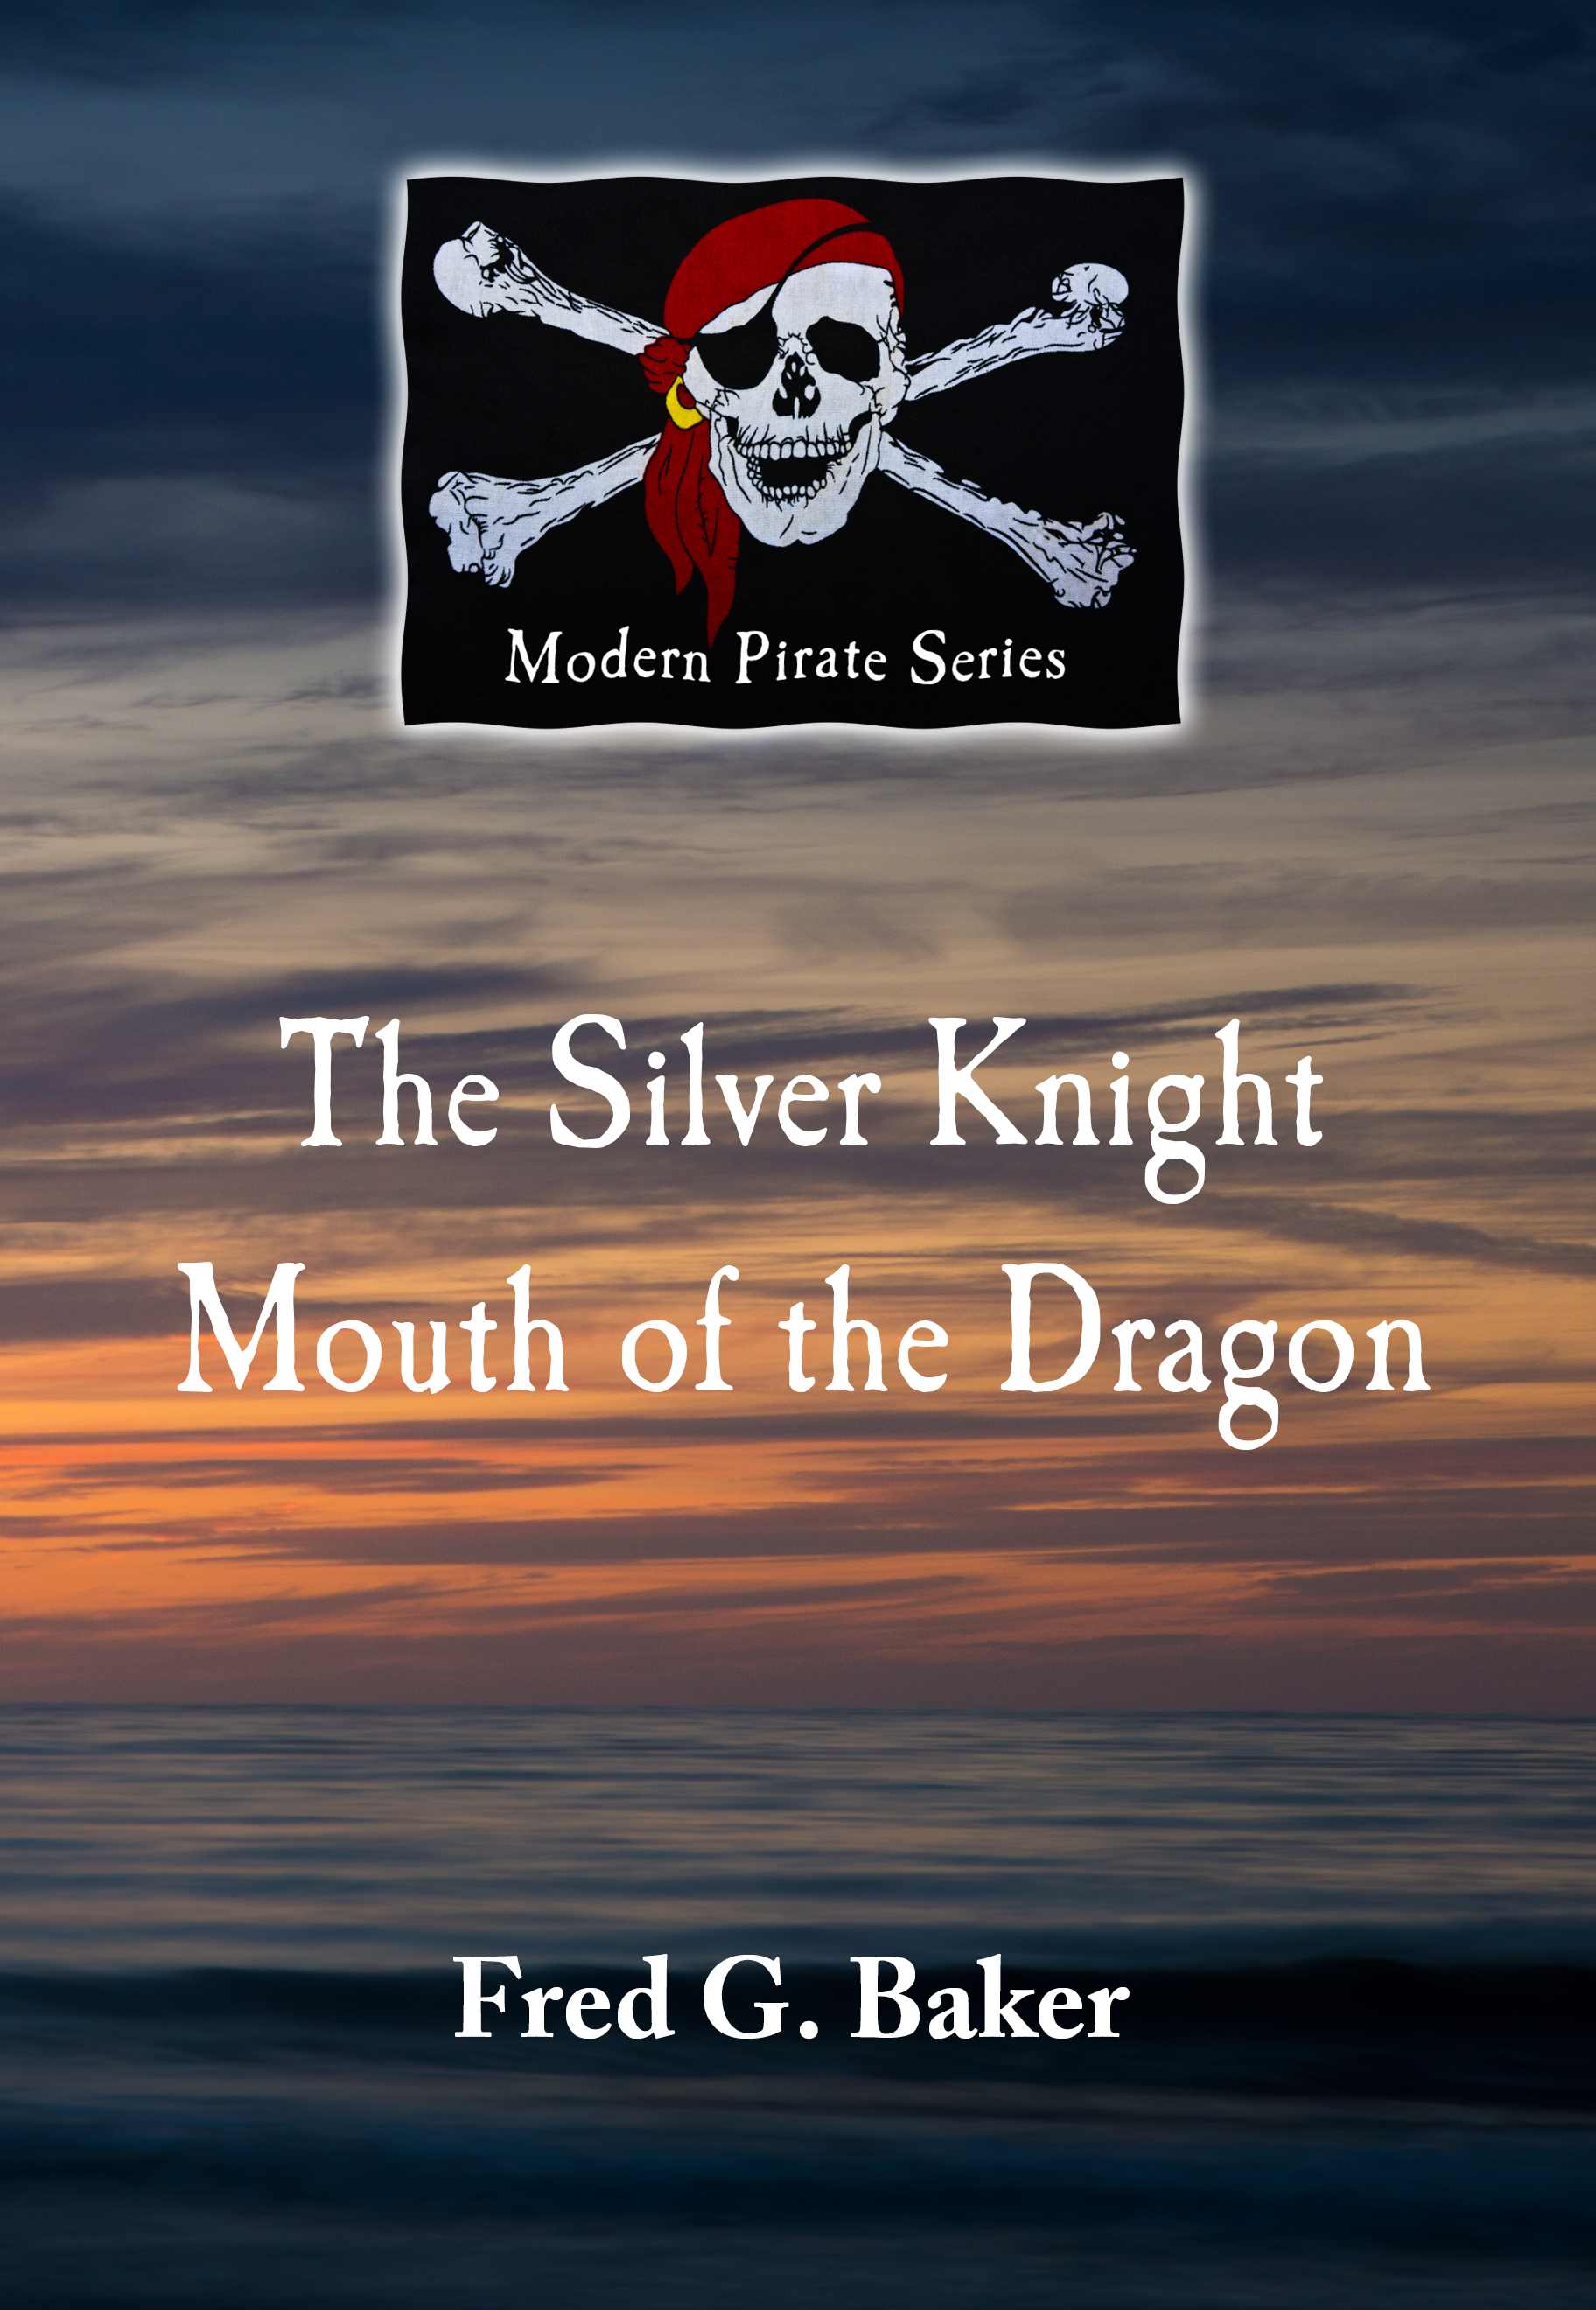 The Silver Knight and Mouth of the Dragon by Fred G. Baker